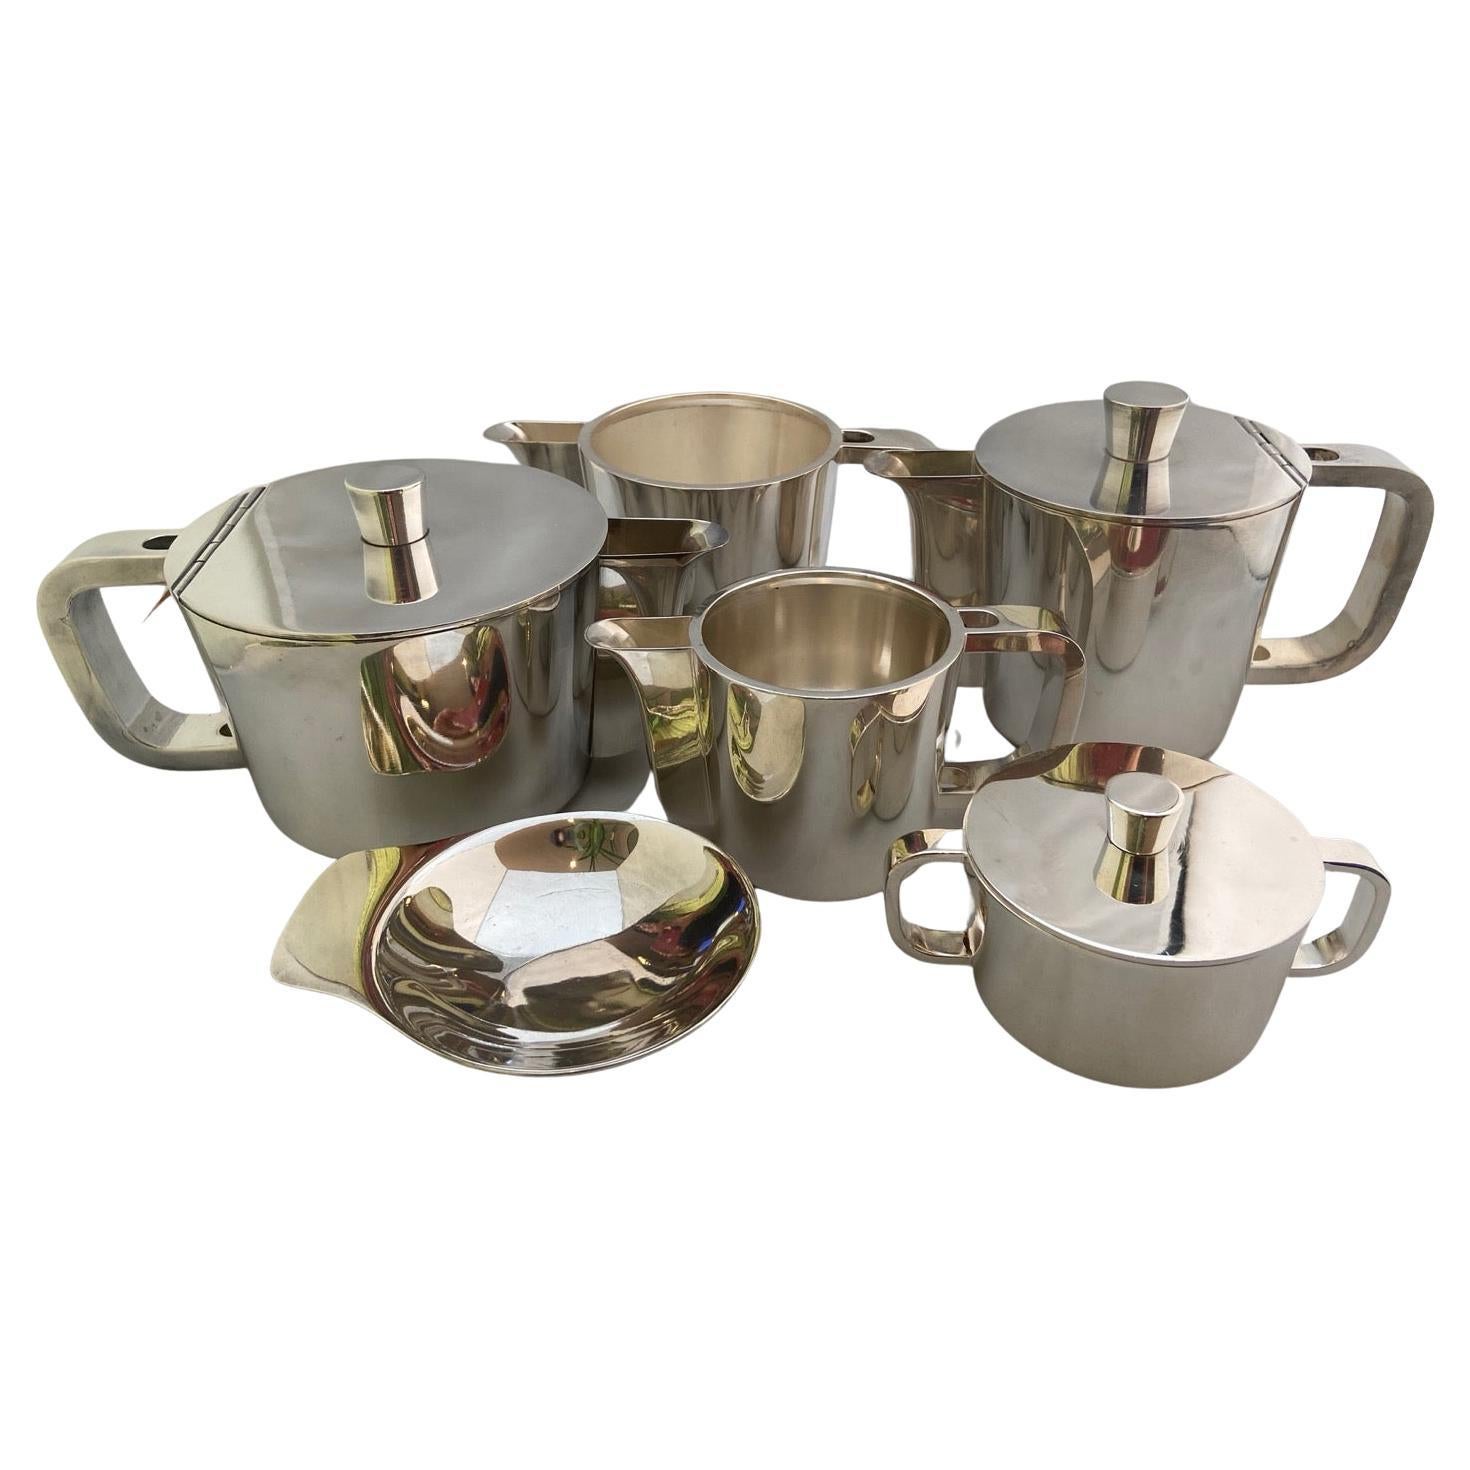 Extensive Silver Plated Gio Ponti Coffee and Tea Set on a Tray, Arthur Krupp 5